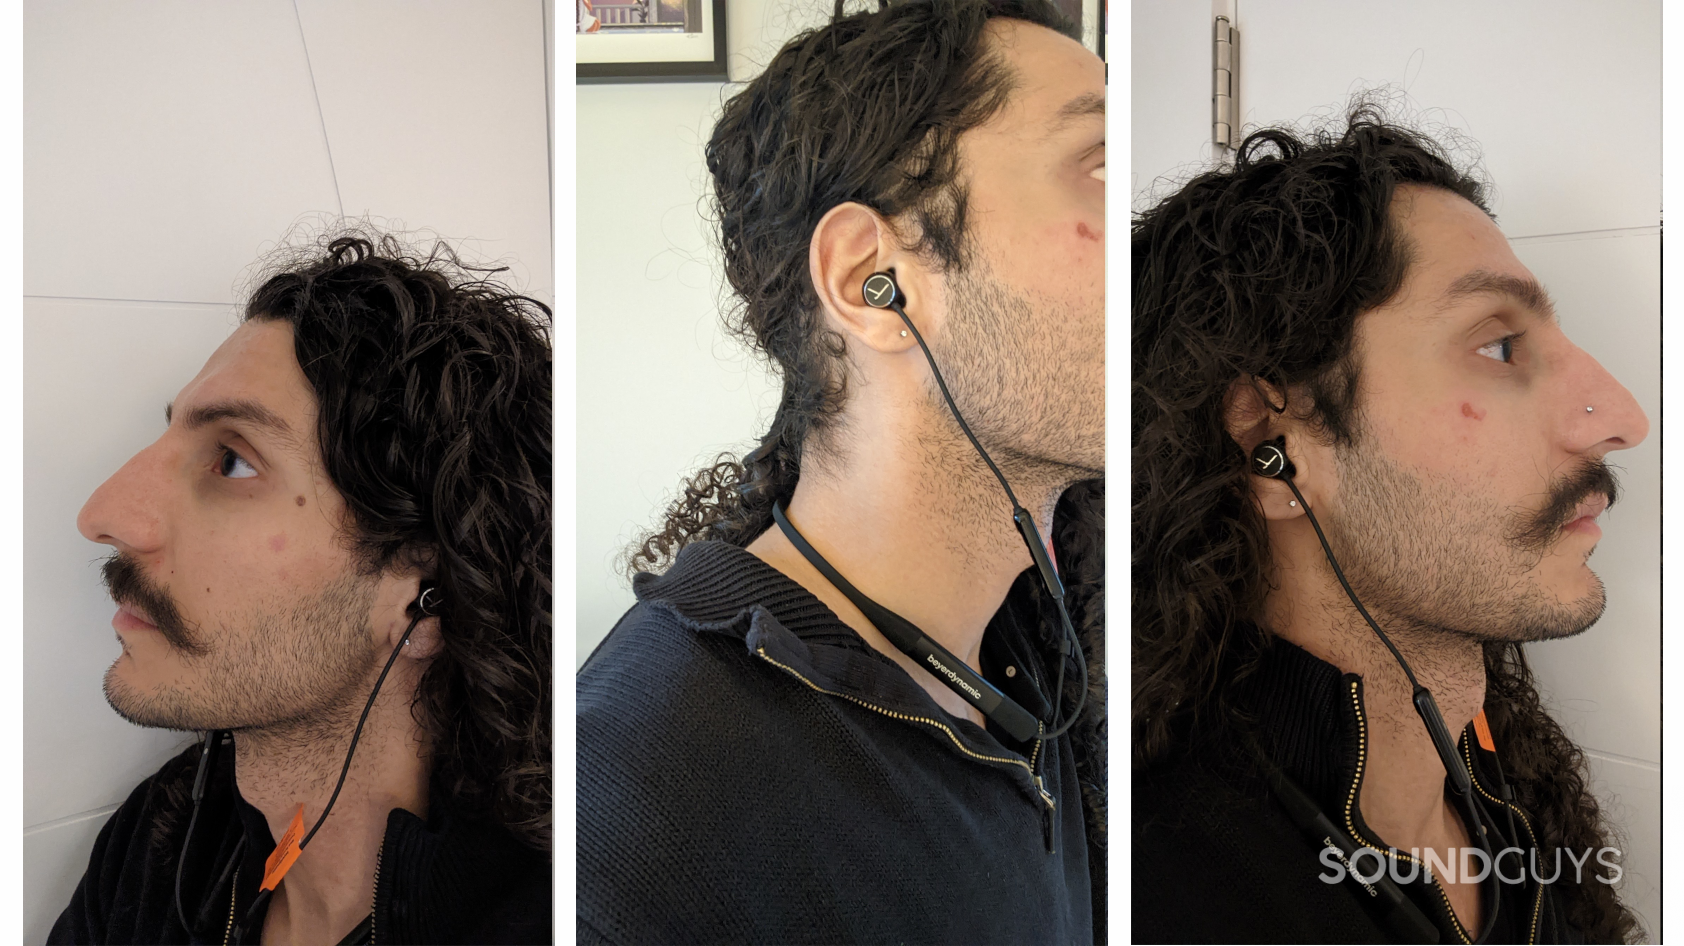 Three images of the beyerdynamic Blue Byrd 2 being worn. From left to right the images are of the left bud in a person's ear, the band draped around a person's neck, and the right bud in a person's ear.